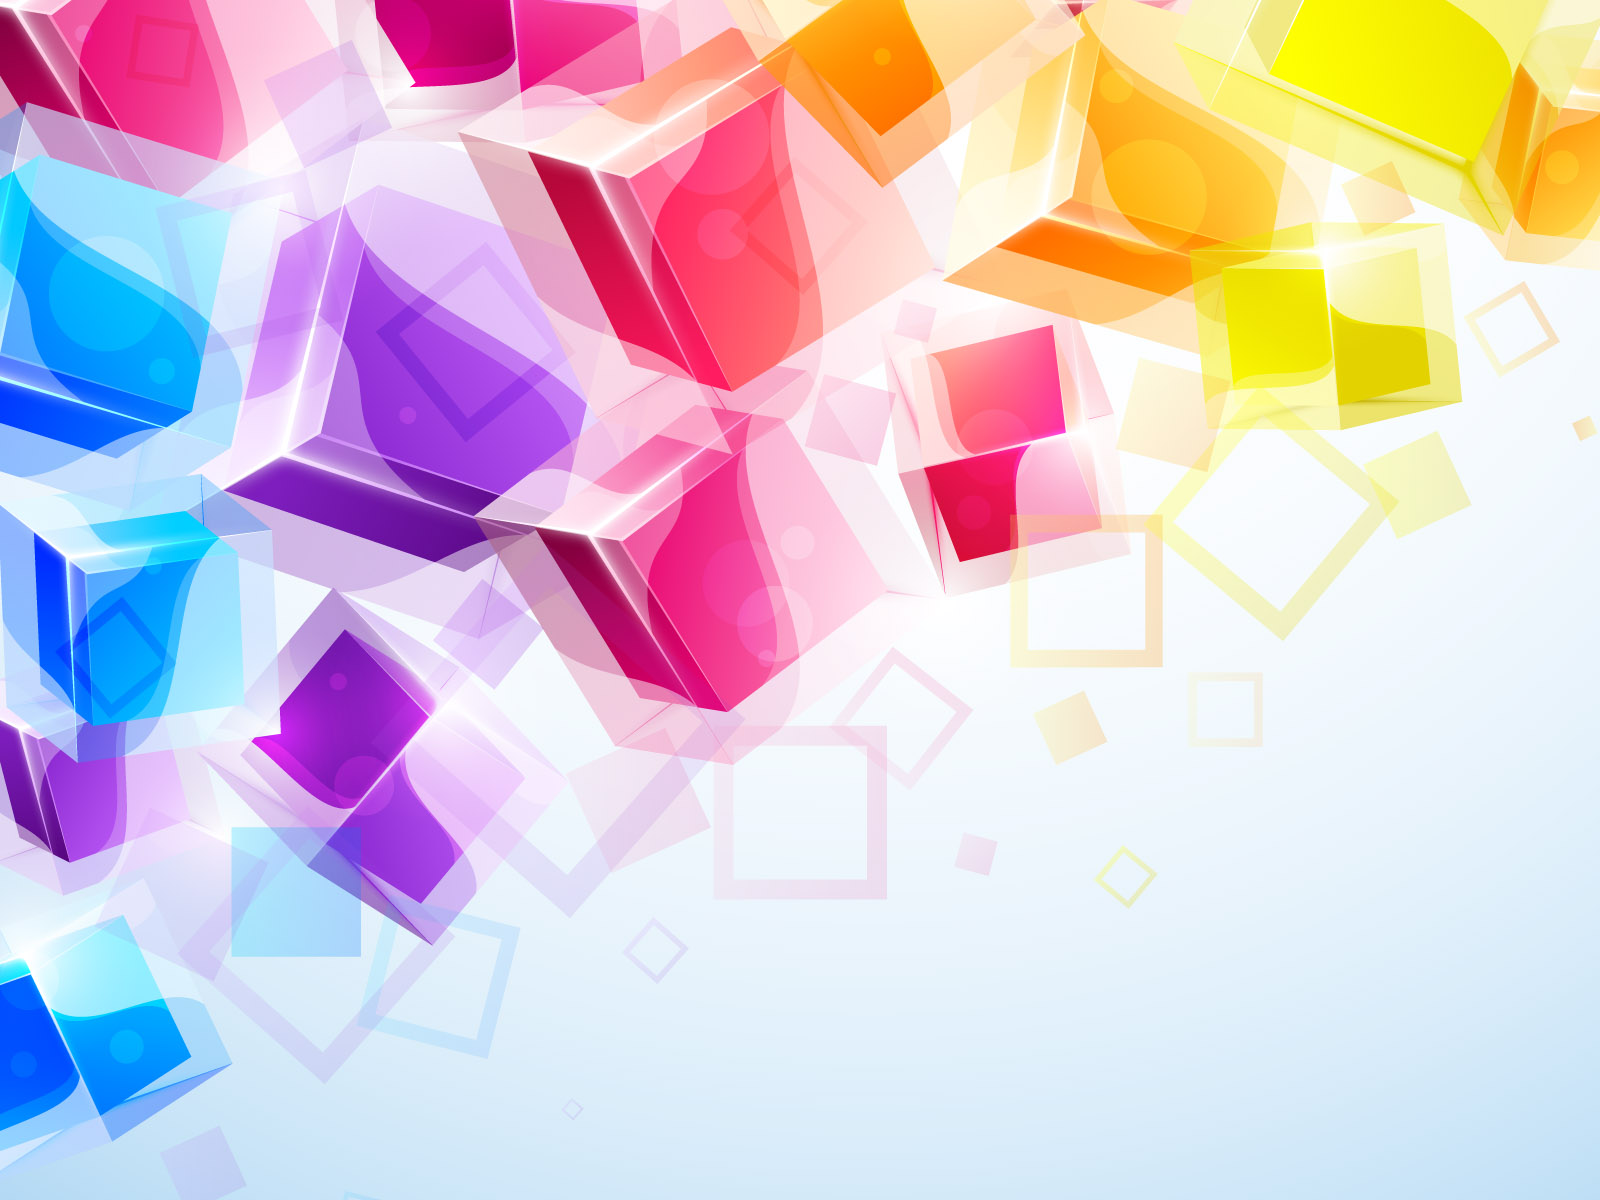 3d Business Colorful Square Background Wallpaper For Powerpoint